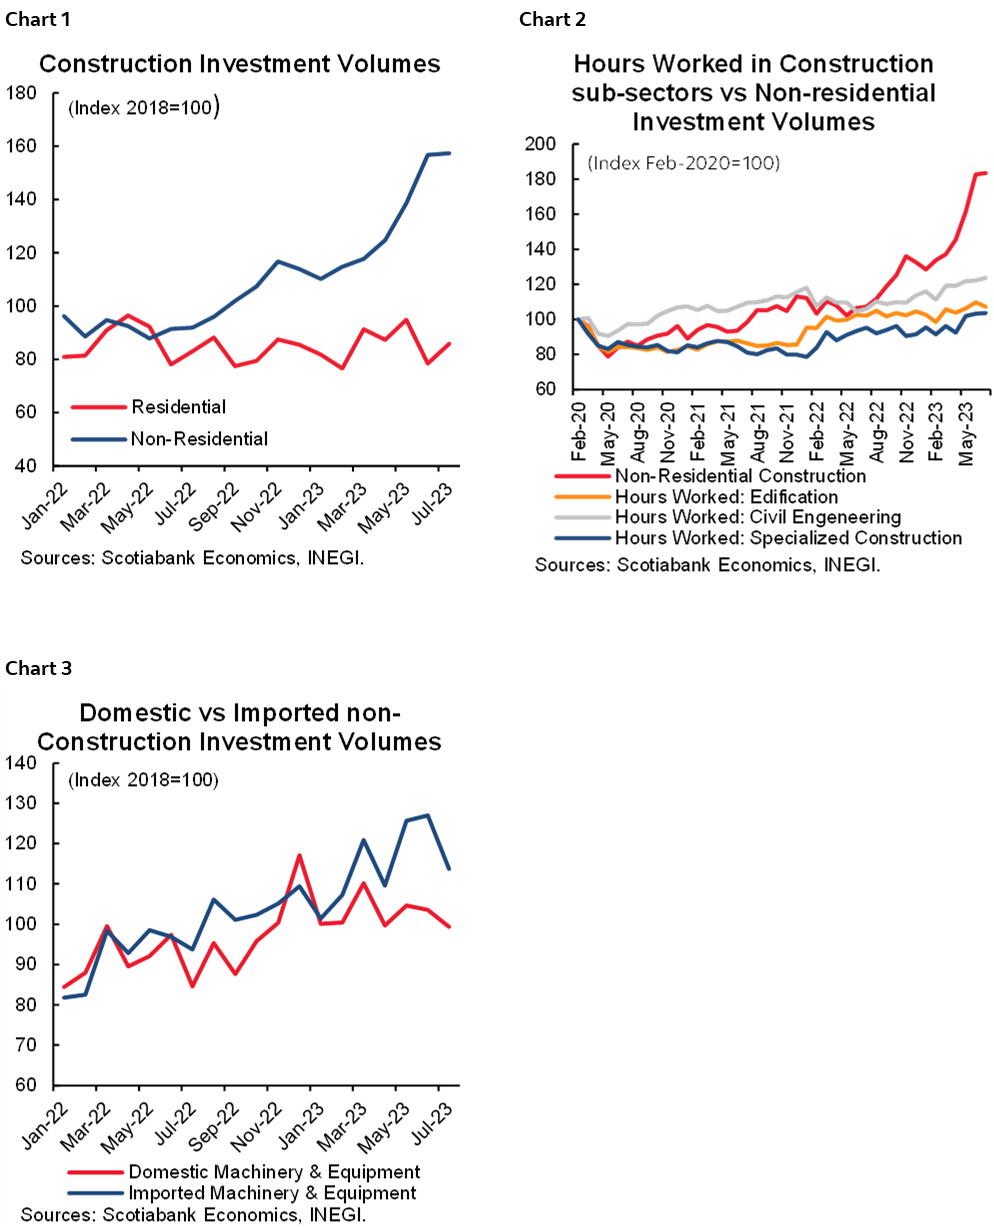 Chart 1: Construction Investment Volumes; Chart 2: Hours Worked in Construction sub-sectors vs Non-residential Investment Volumes; Chart 3: Domestic vs Imported non- Construction Investment Volumes